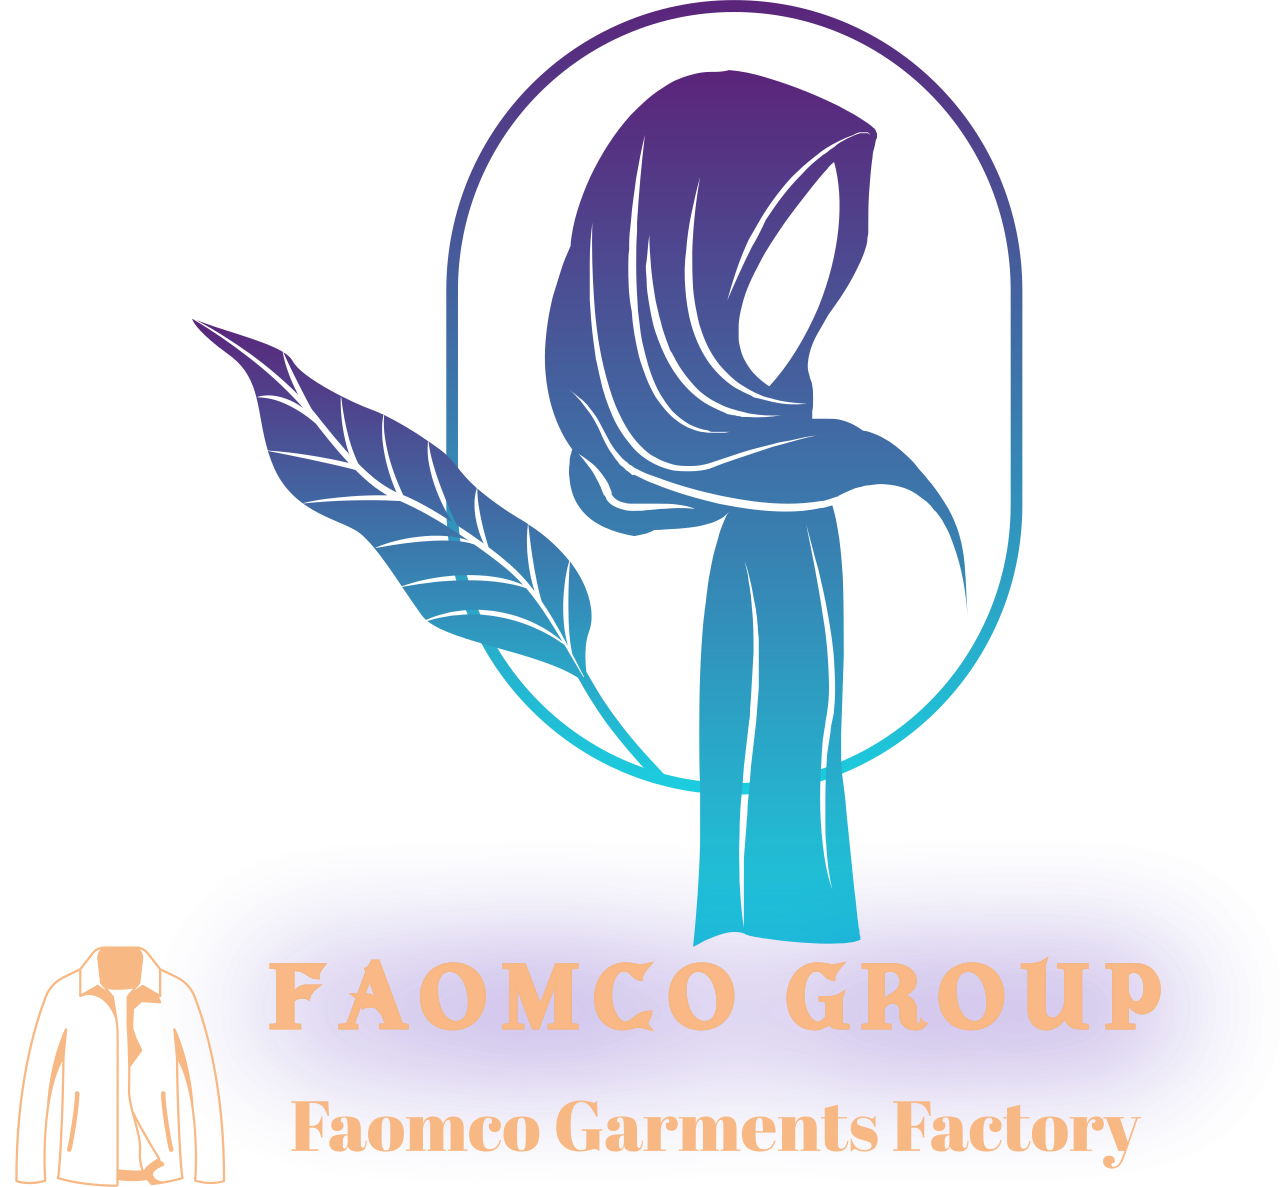 Faomco Group's web page